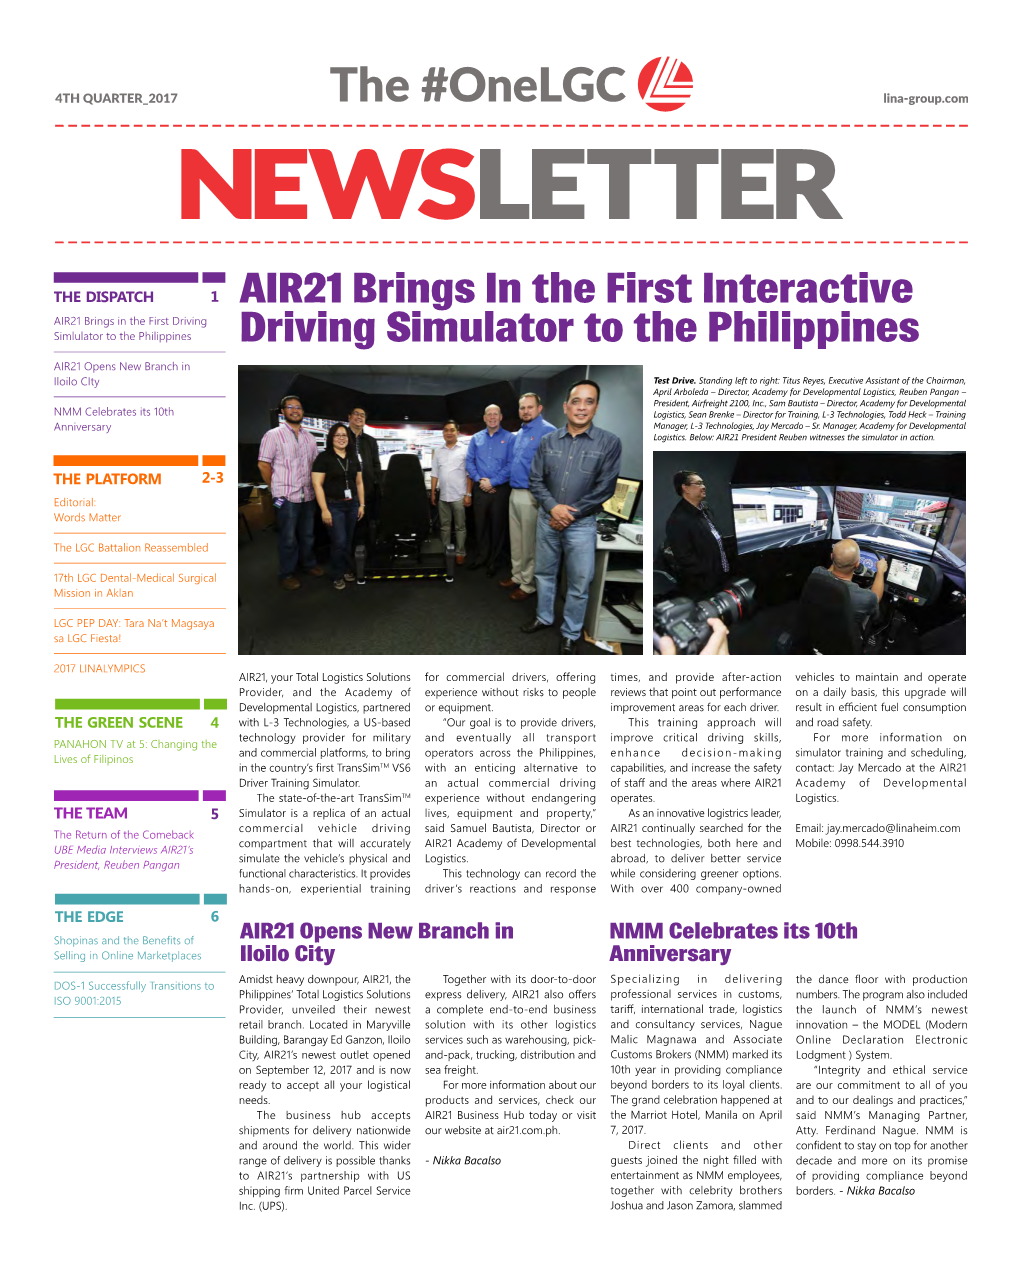 The #Onelgc Newsletter Is a Publication of UBE Media